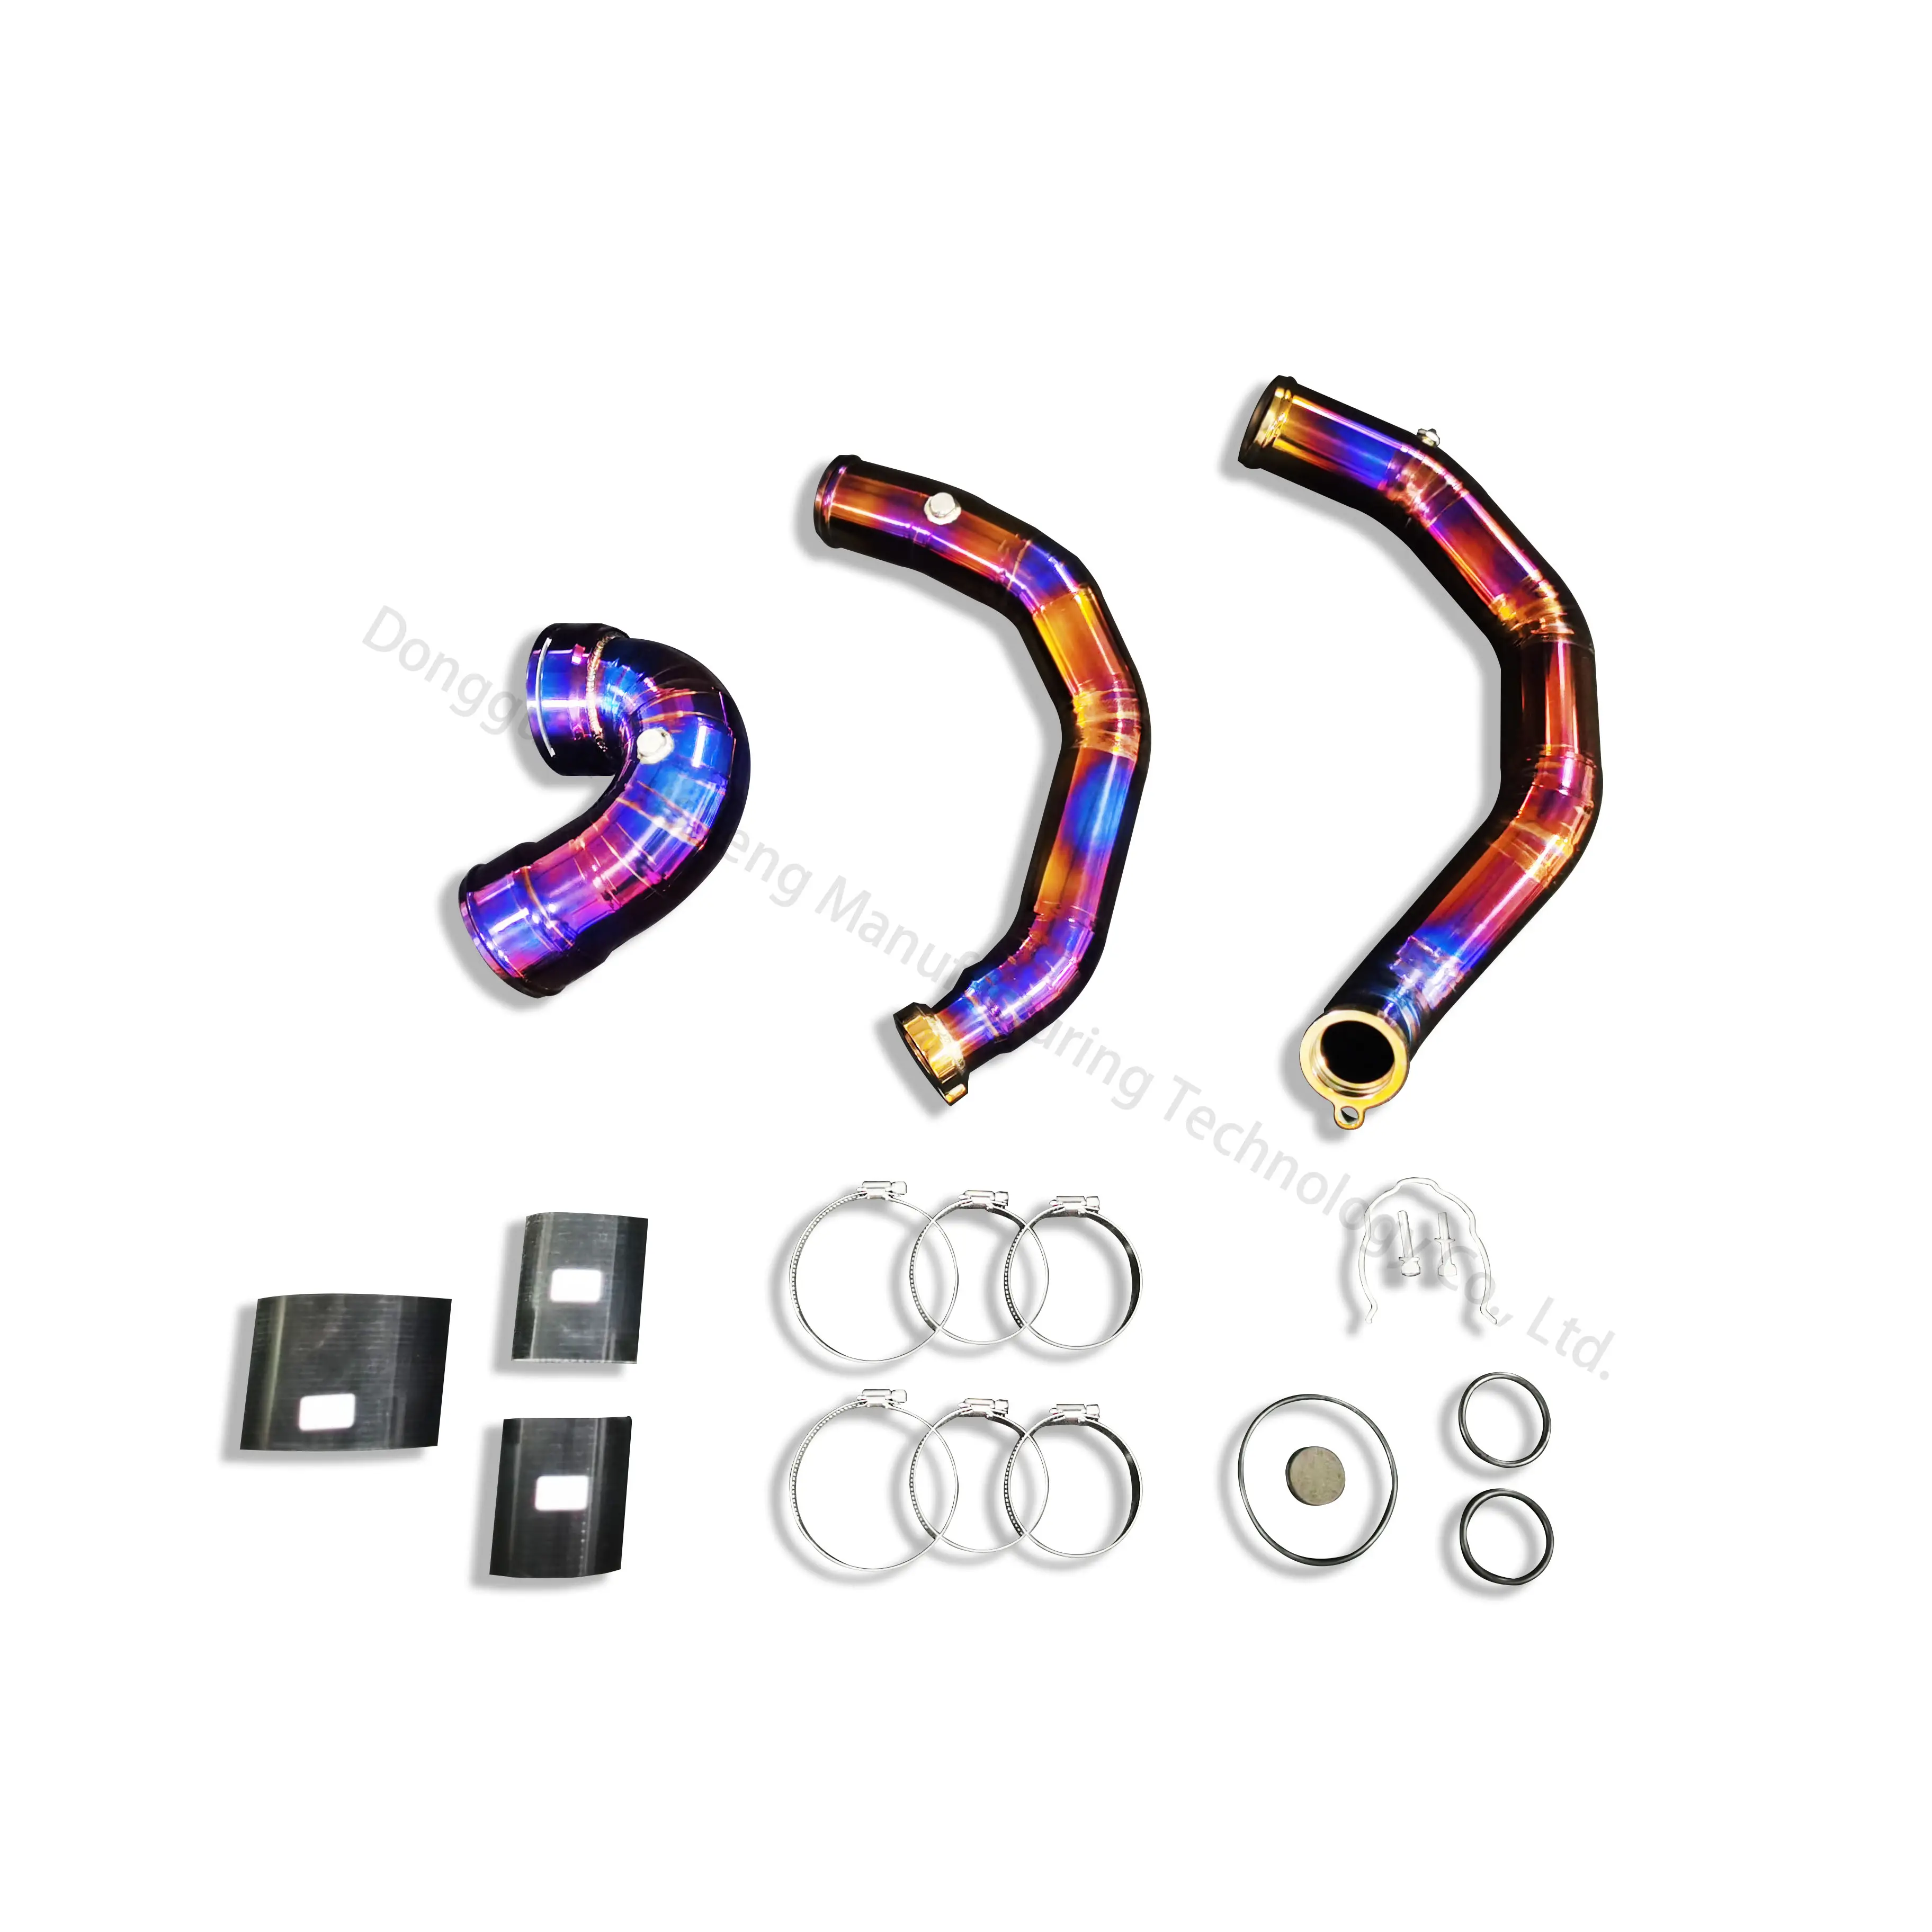 Factory Outlet Groothandel Custom Titanium Luchtaanzuigbuis Auto Intake Tube Kit Voor Bmw M2C M3 M4 F80 F82 S55 pijp